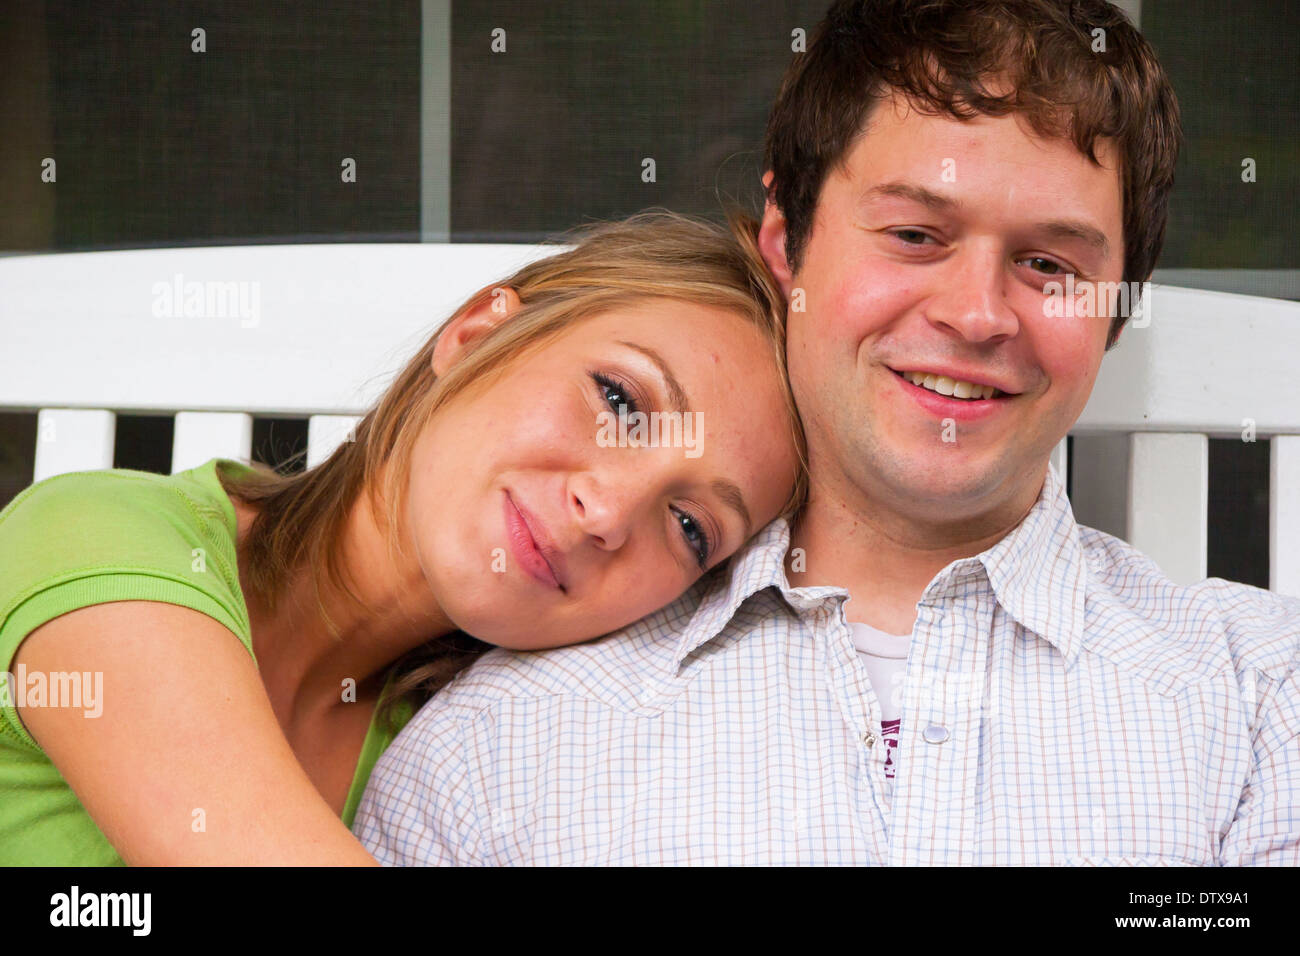 Engaged couple spending time together sitting on a porch with a white rocking chair. Stock Photo